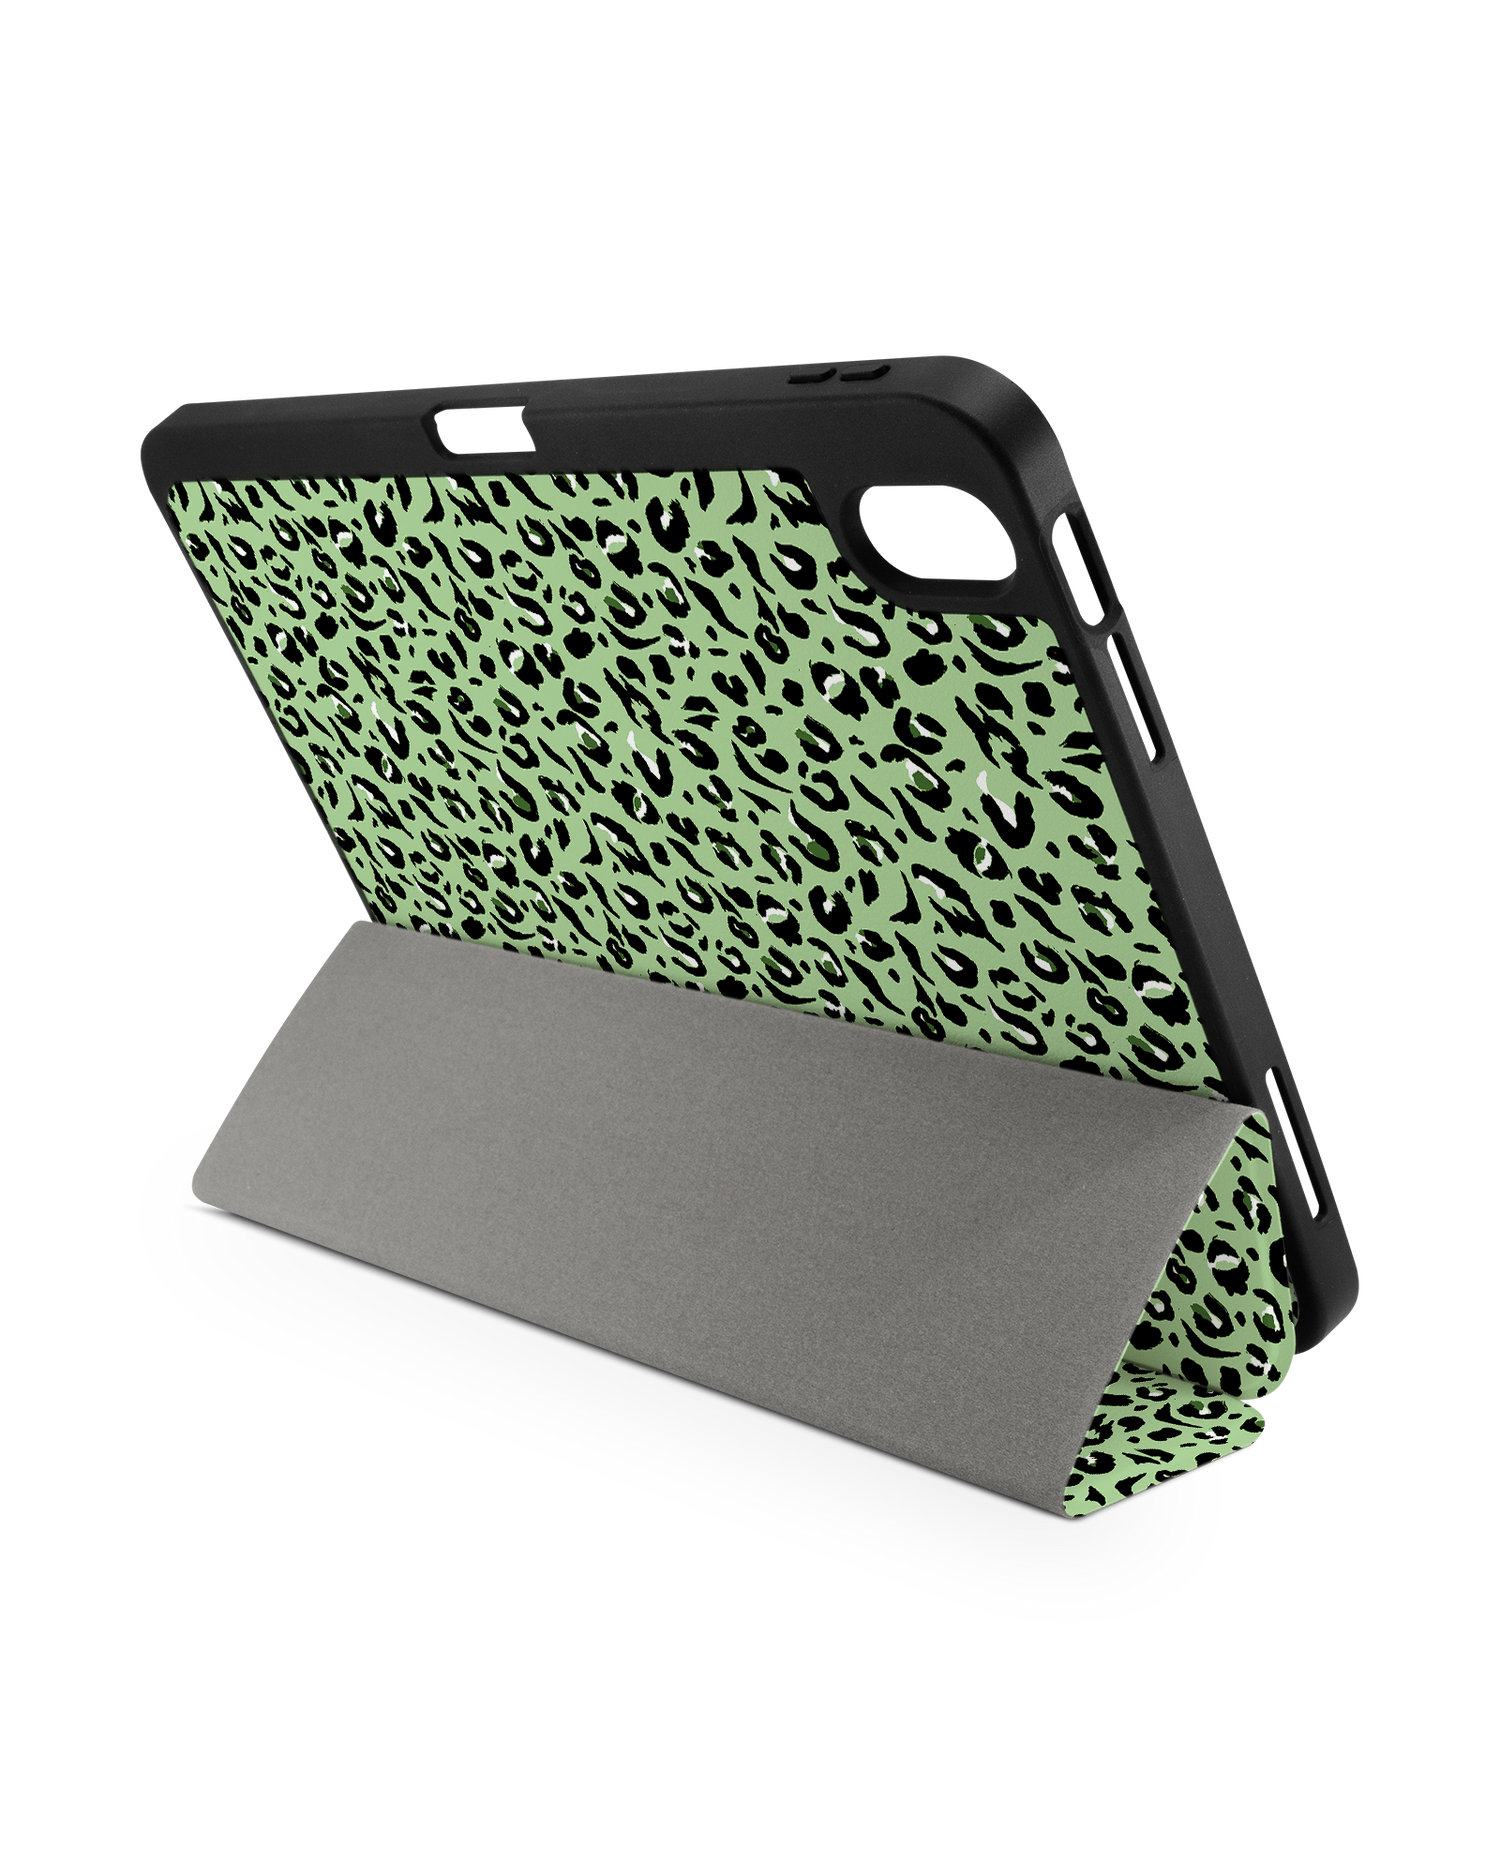 Mint Leopard iPad Case with Pencil Holder for Apple iPad (10th Generation): Set up in landscape format (back view)